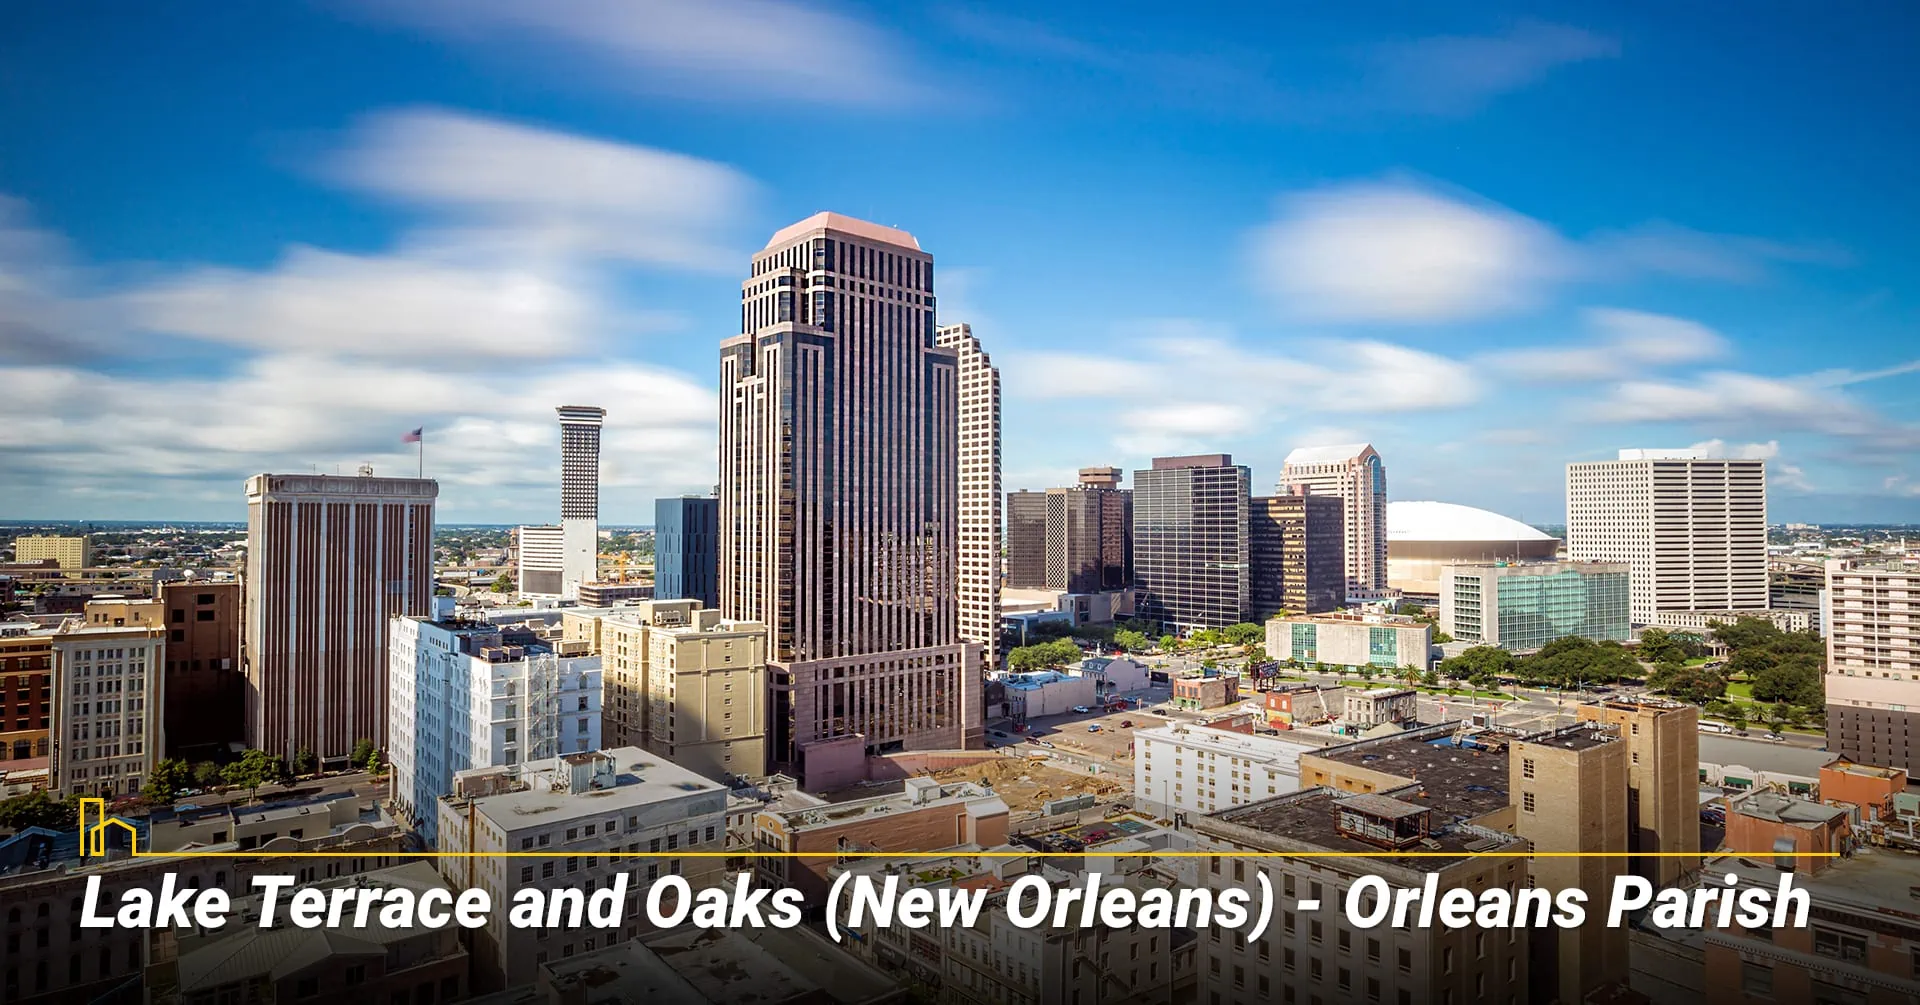 Lake Terrace and Oaks (New Orleans) - Orleans Parish